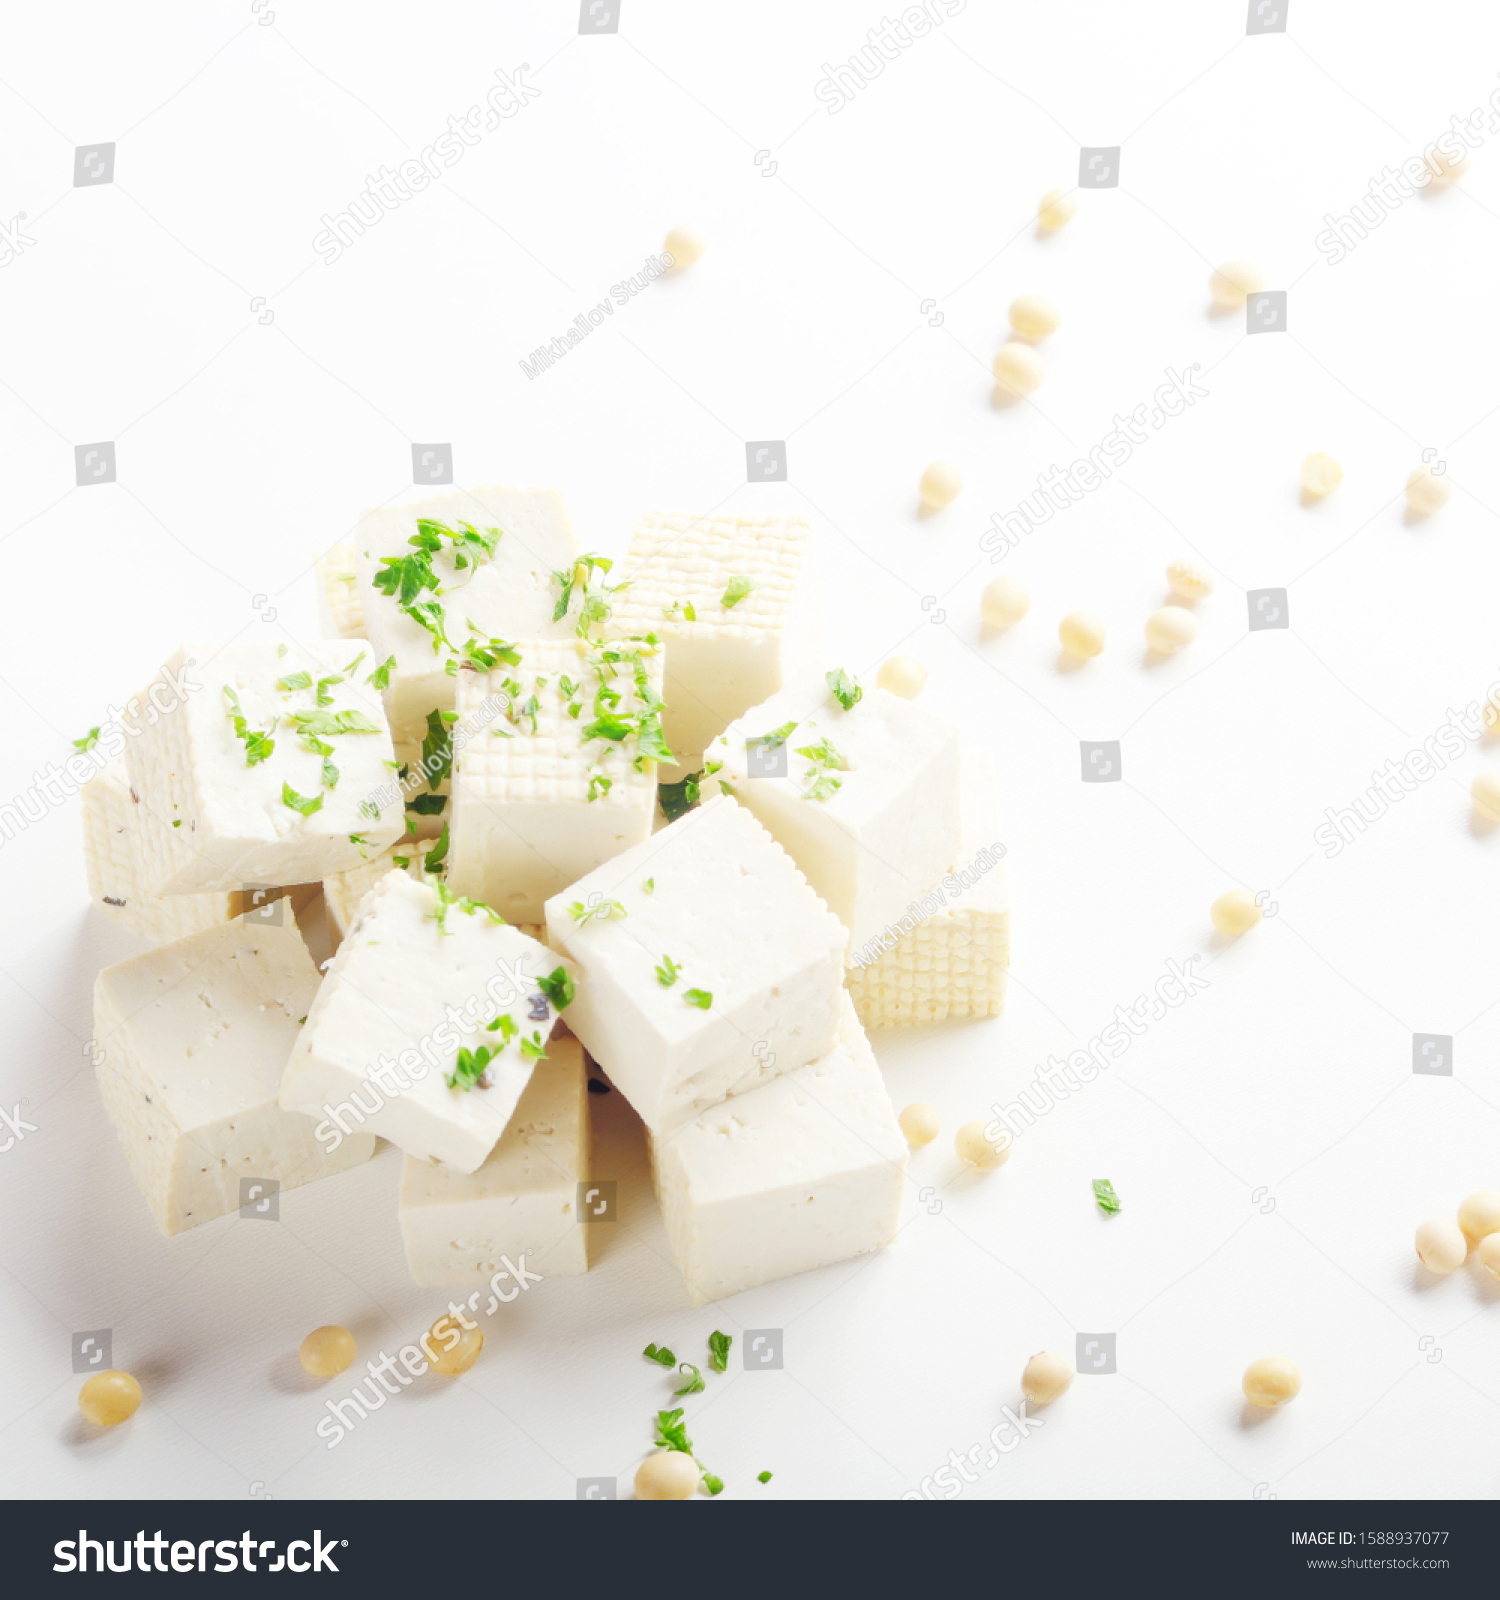 Soy Bean Curd Tofu Greens On Stock Photo Edit Now 1588937077,Painting Baseboards With Carpet